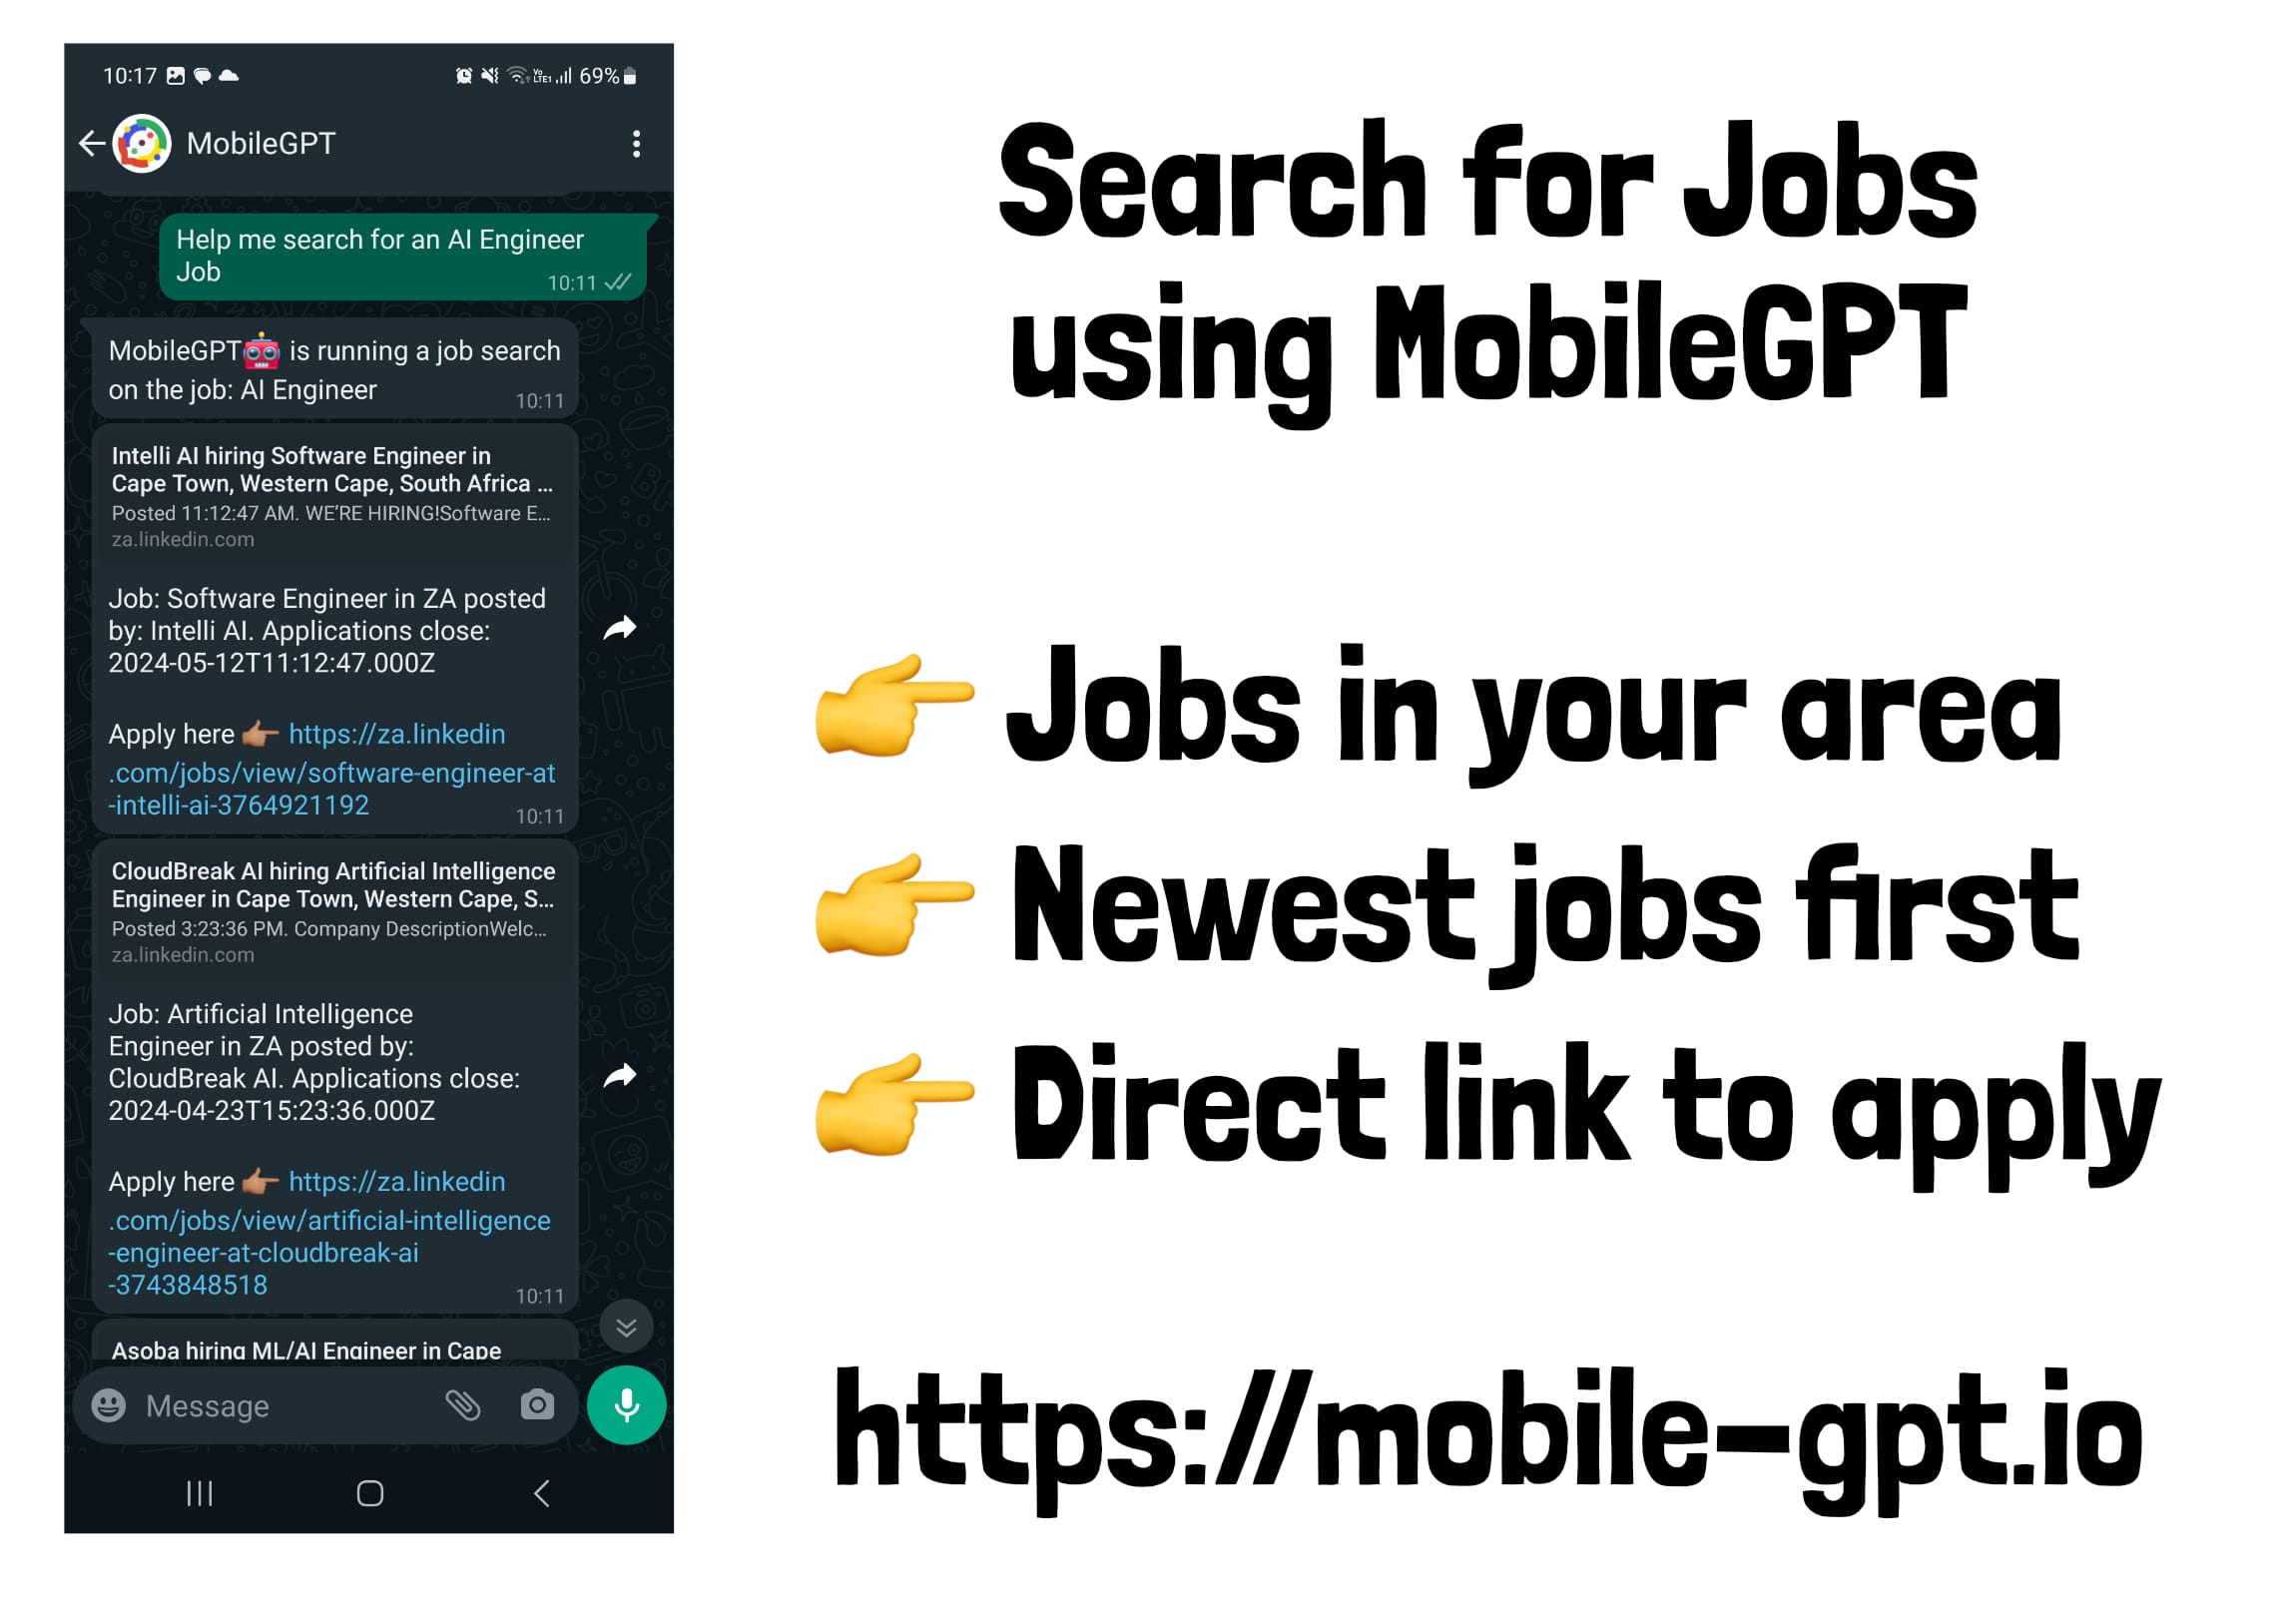 Search for jobs online